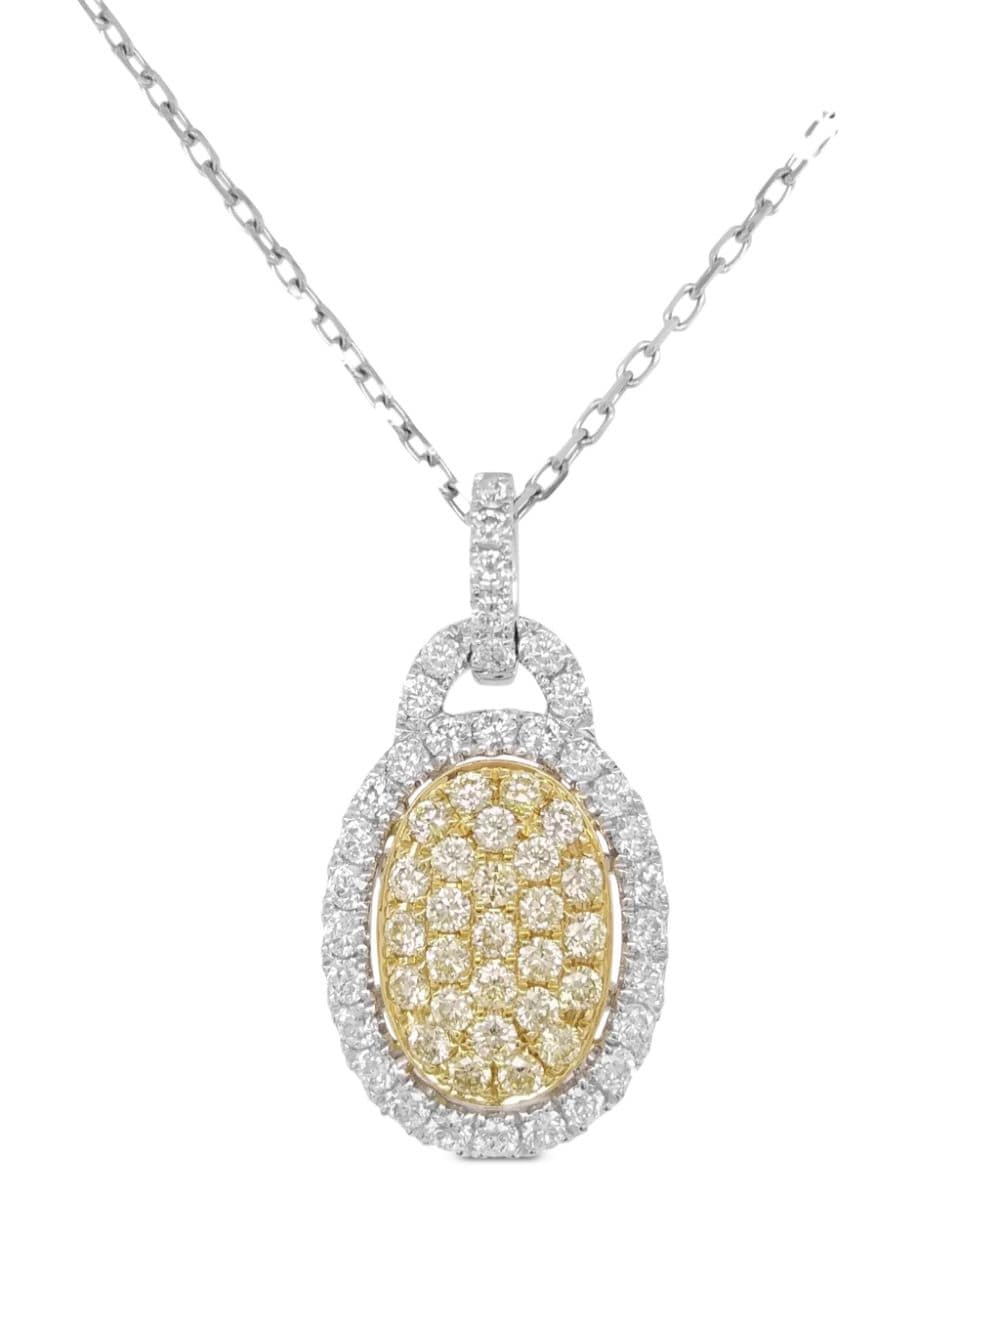 18kt yellow gold and platinum diamond necklace